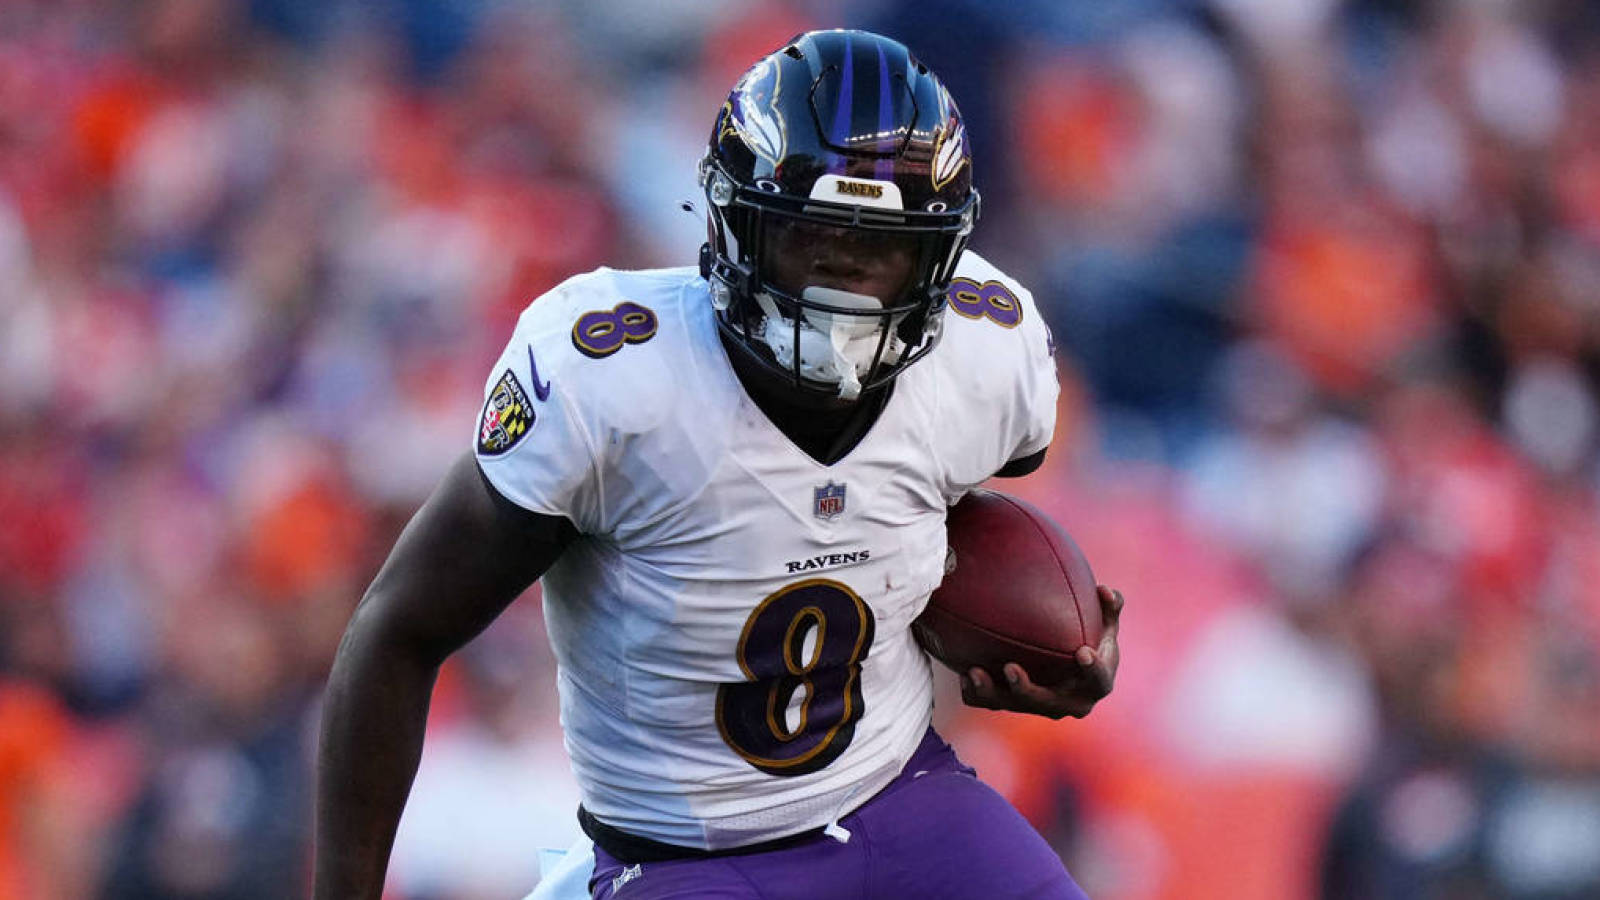 Ravens set rushing record in final seconds of Sunday's game